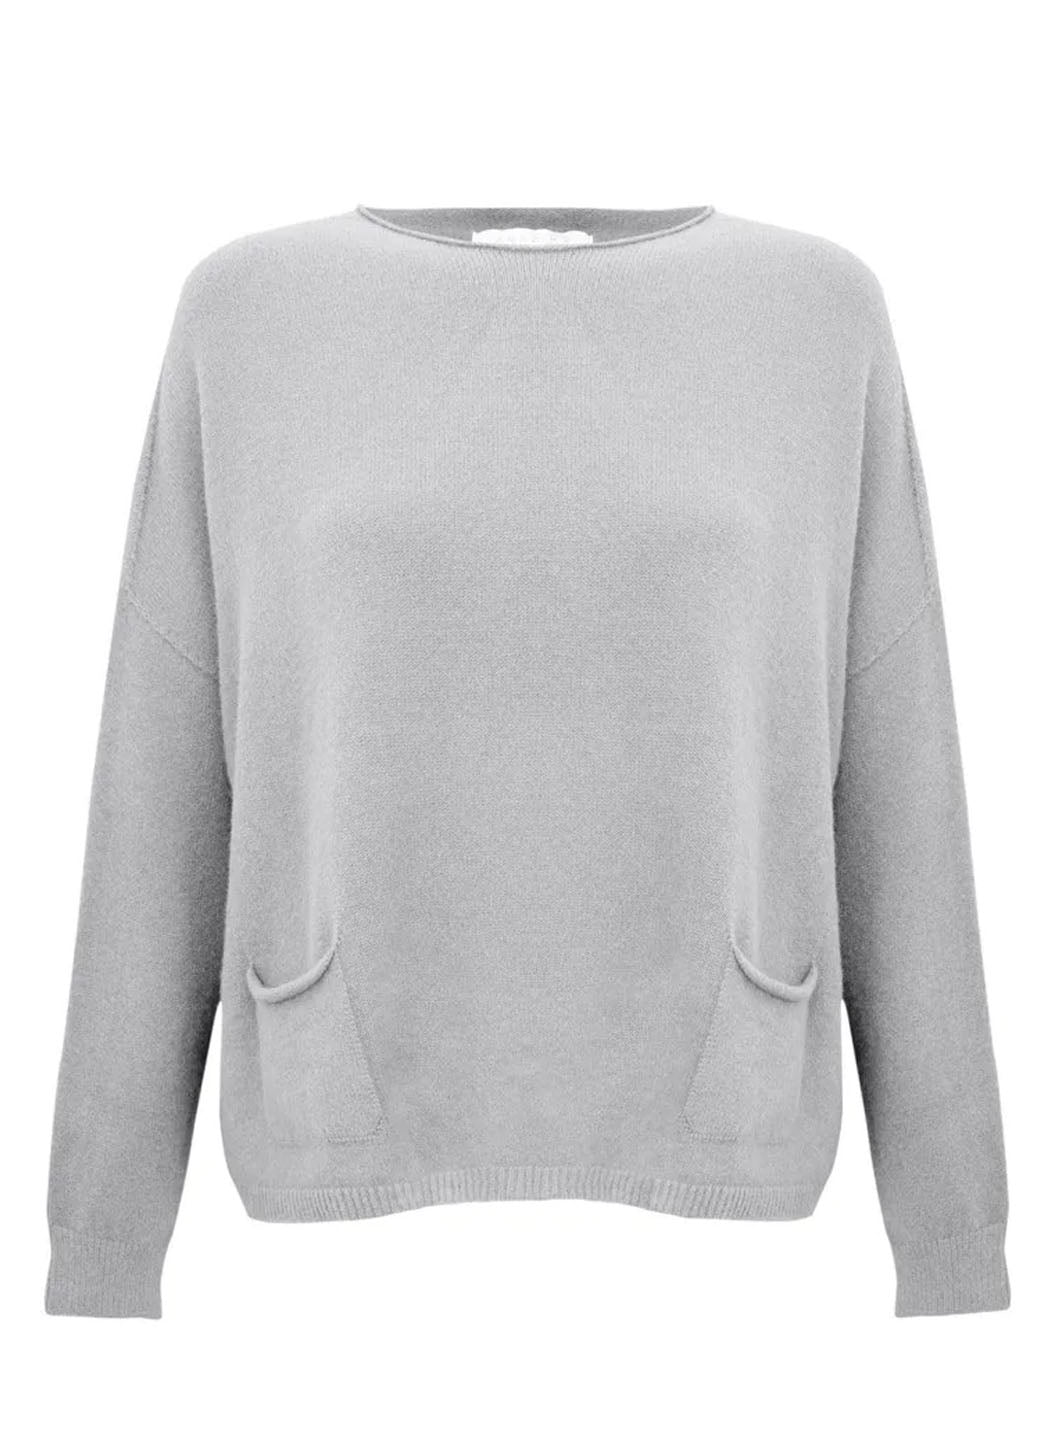 Amazing Woman Jodie Sweater – Details Direct